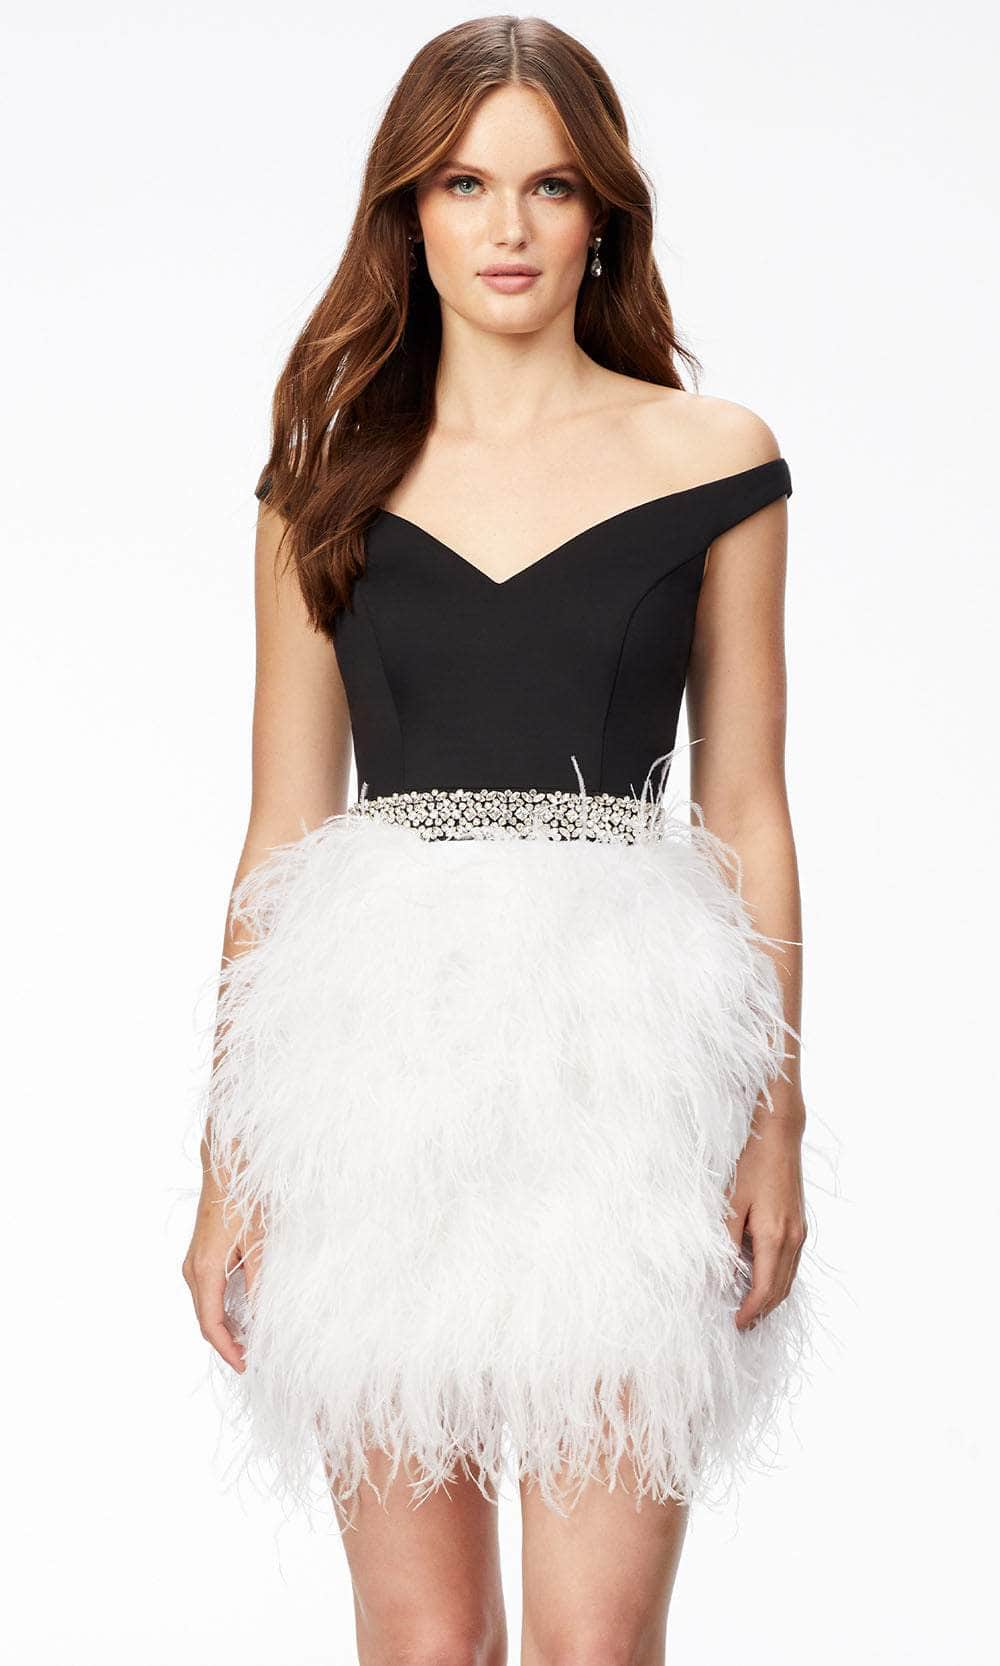 Ashley Lauren 4536 - Feathered Skirt Cocktail Dress Special Occasion Dress 0 / Black/White